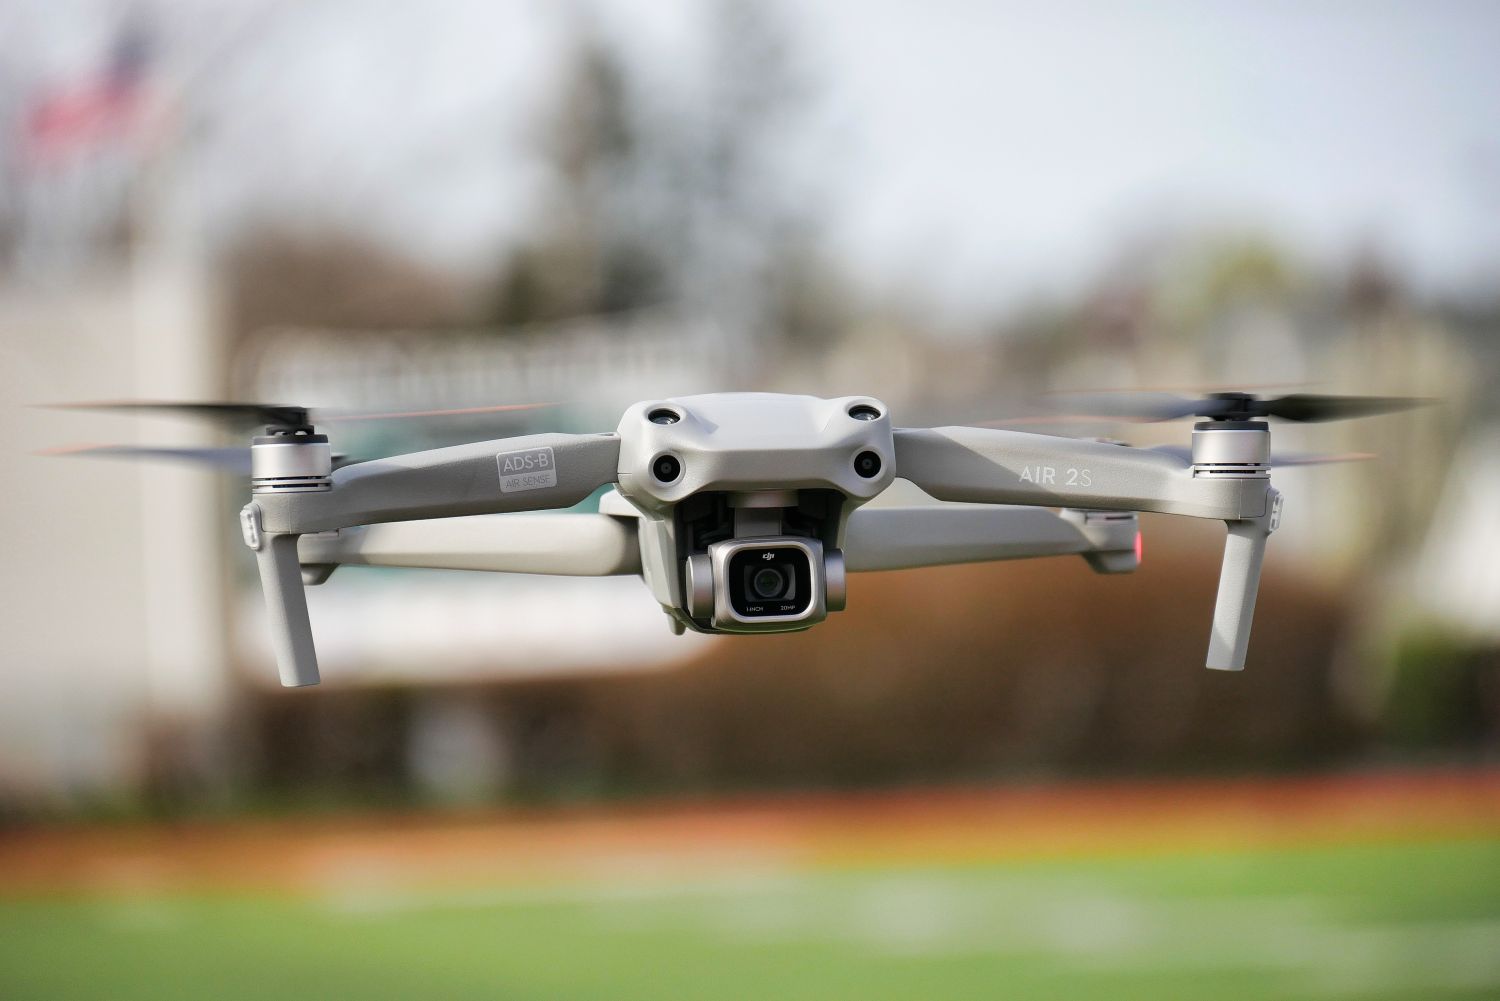 You Can Turn Your DJI Air 2S or Air 2 Into a Whole New Drone